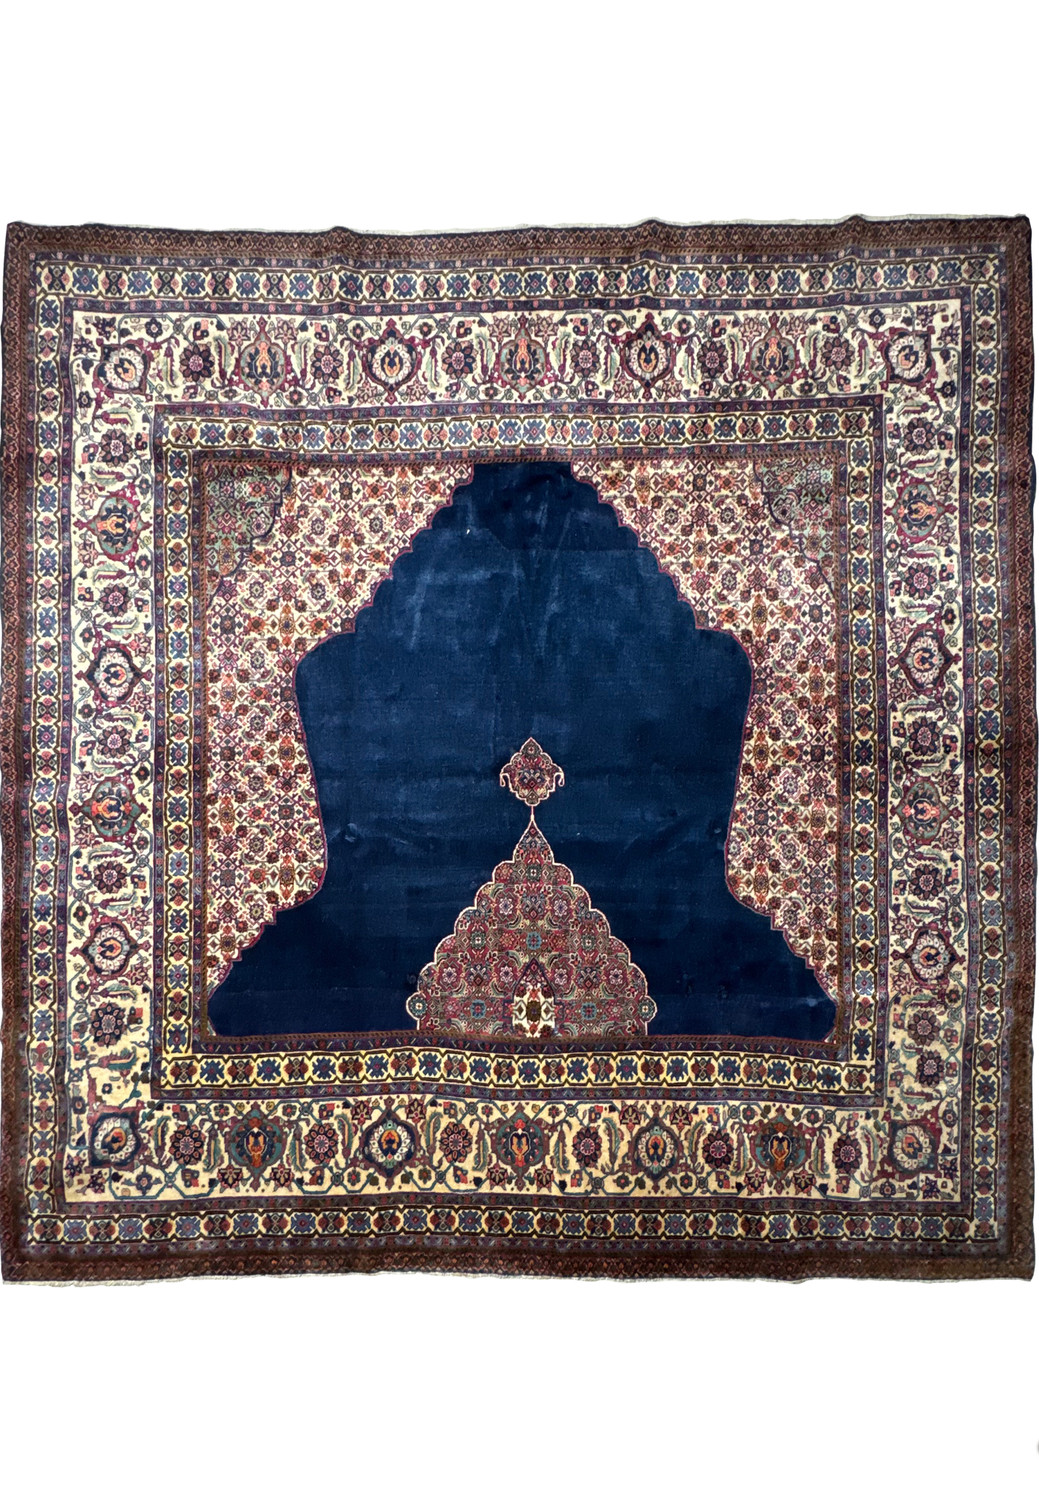 Full display of 8x8 Persian Tabriz rug with traditional Persian patterns and mihrab